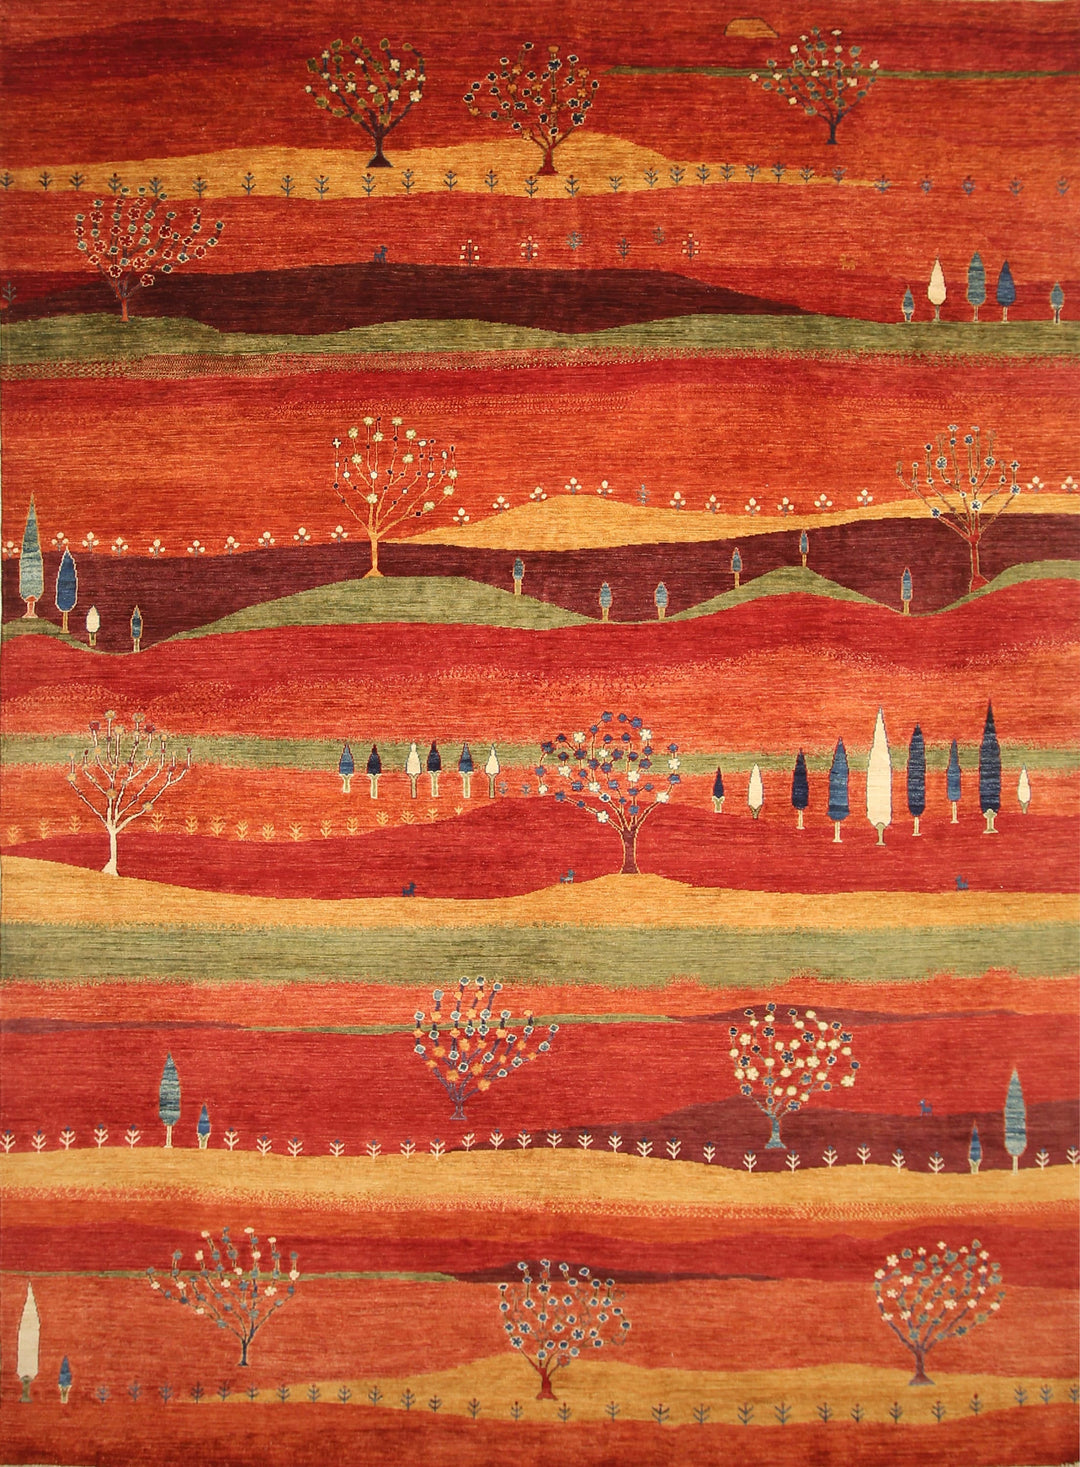 9x12 Landscape Gabbeh Rusty Red Orange Tribal Afghan Hand knotted Rug